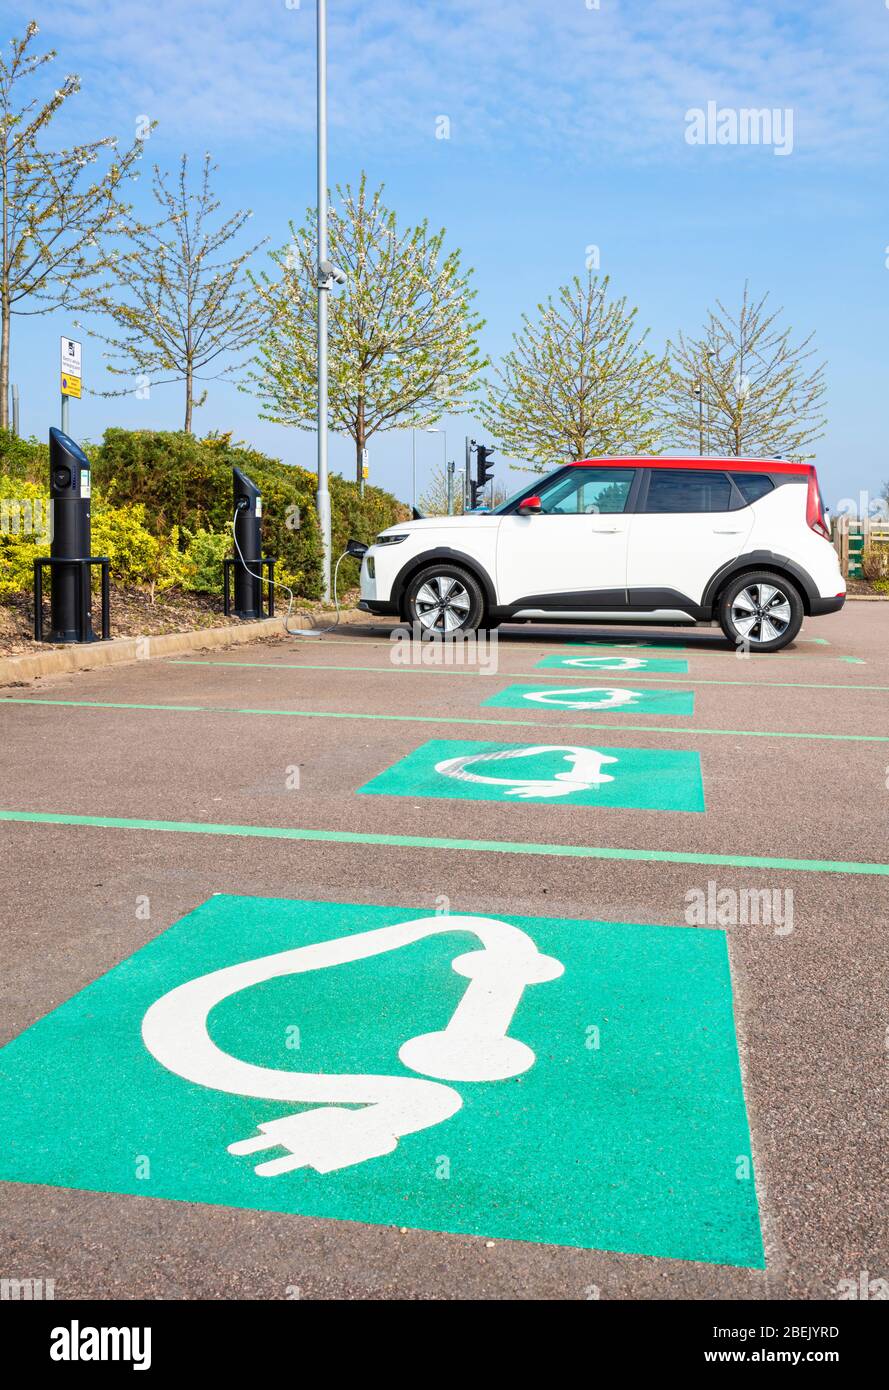 New electric car Kia E Soul march 2020 electric car charging at a public electric car charger parked in electric car charging parking space UK Stock Photo